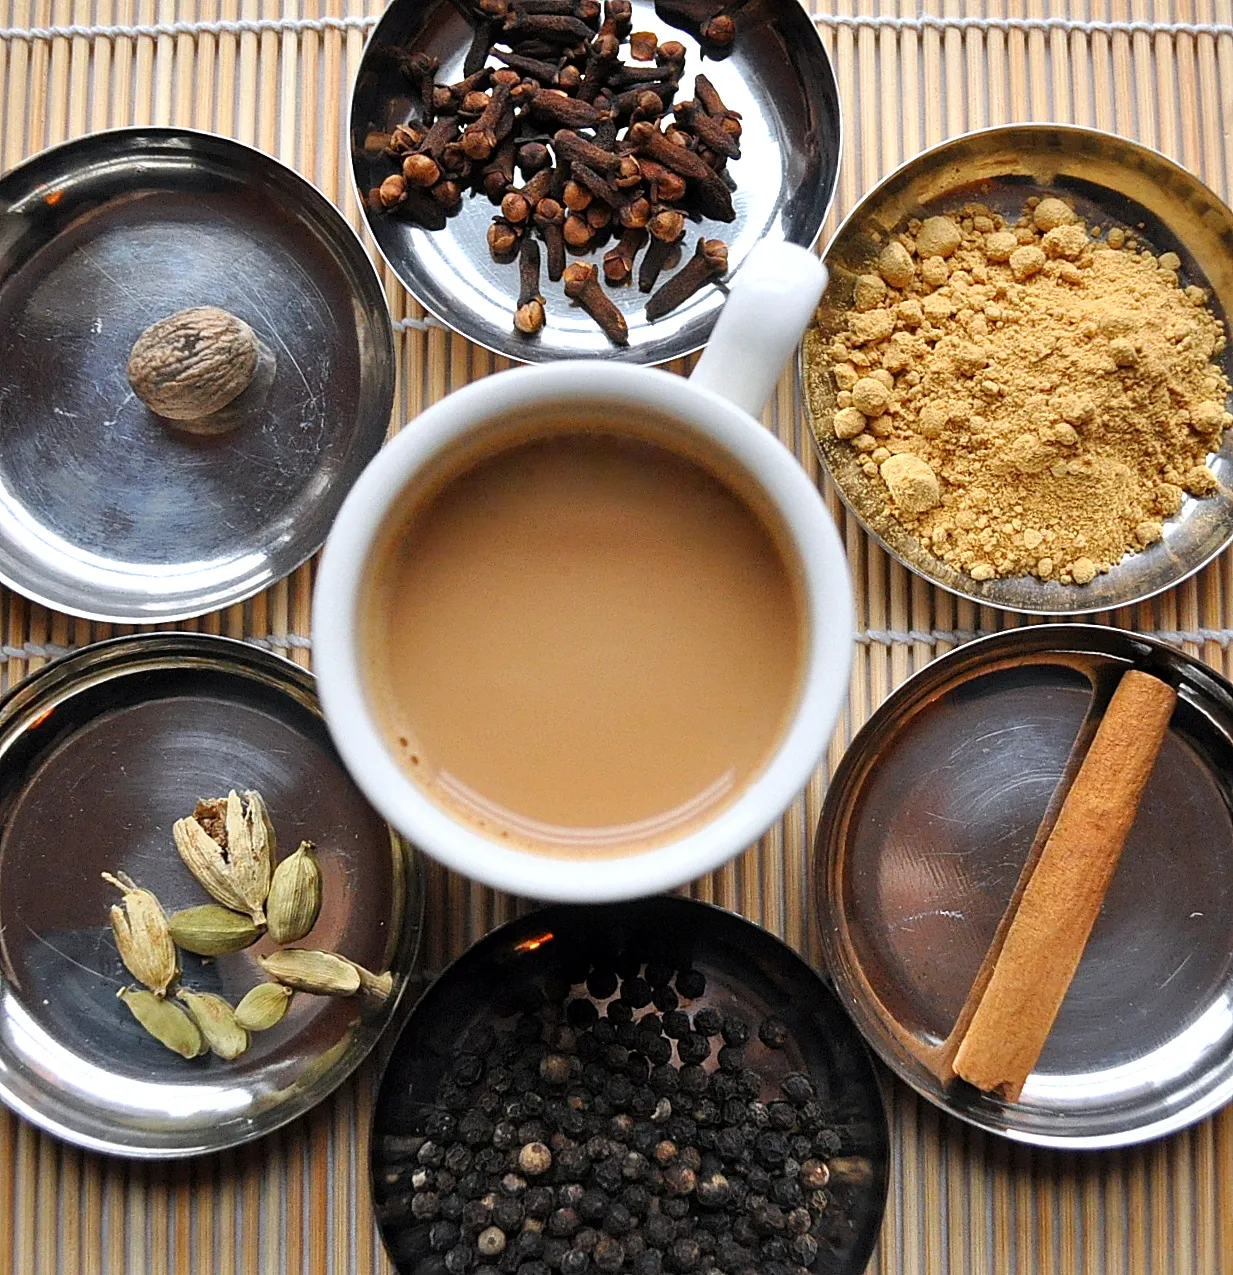 Which tea variety is commonly enjoyed with milk and sugar?